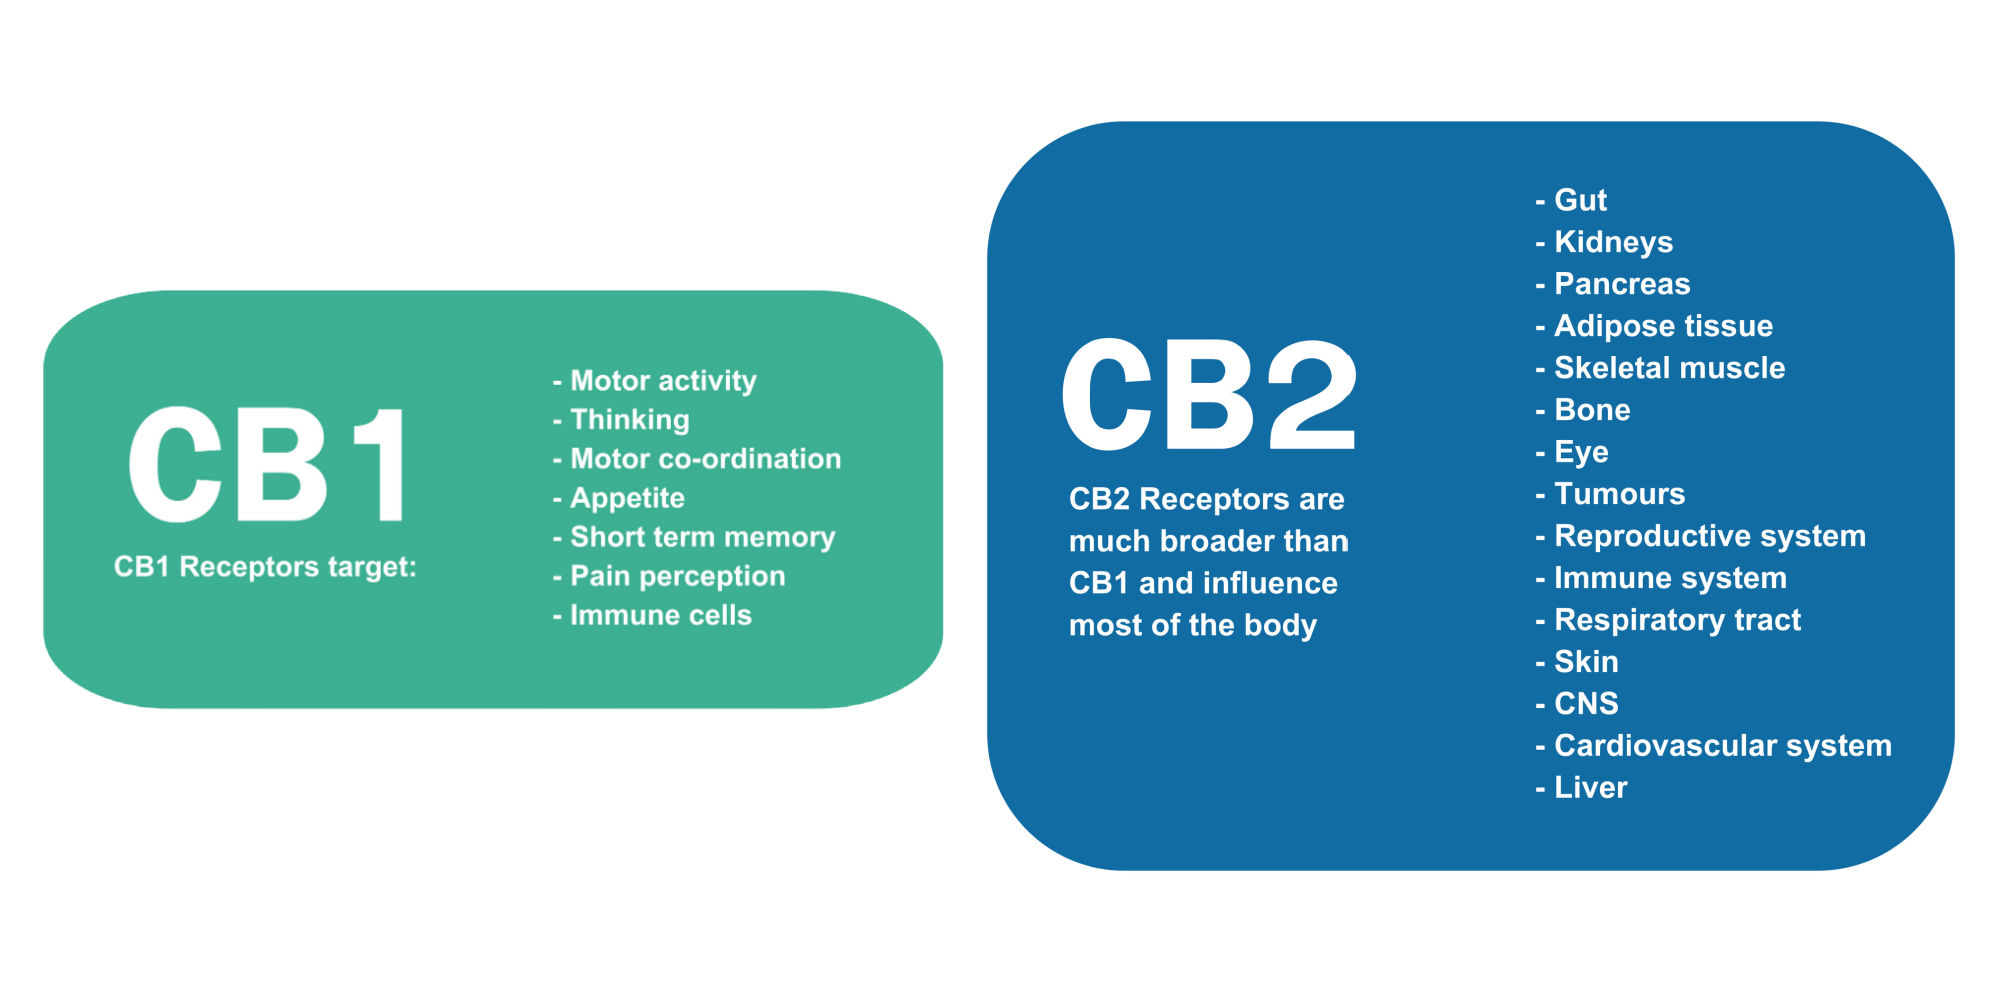 CB2 receptors are much broader than the CB1 receptors and influence most of the body..